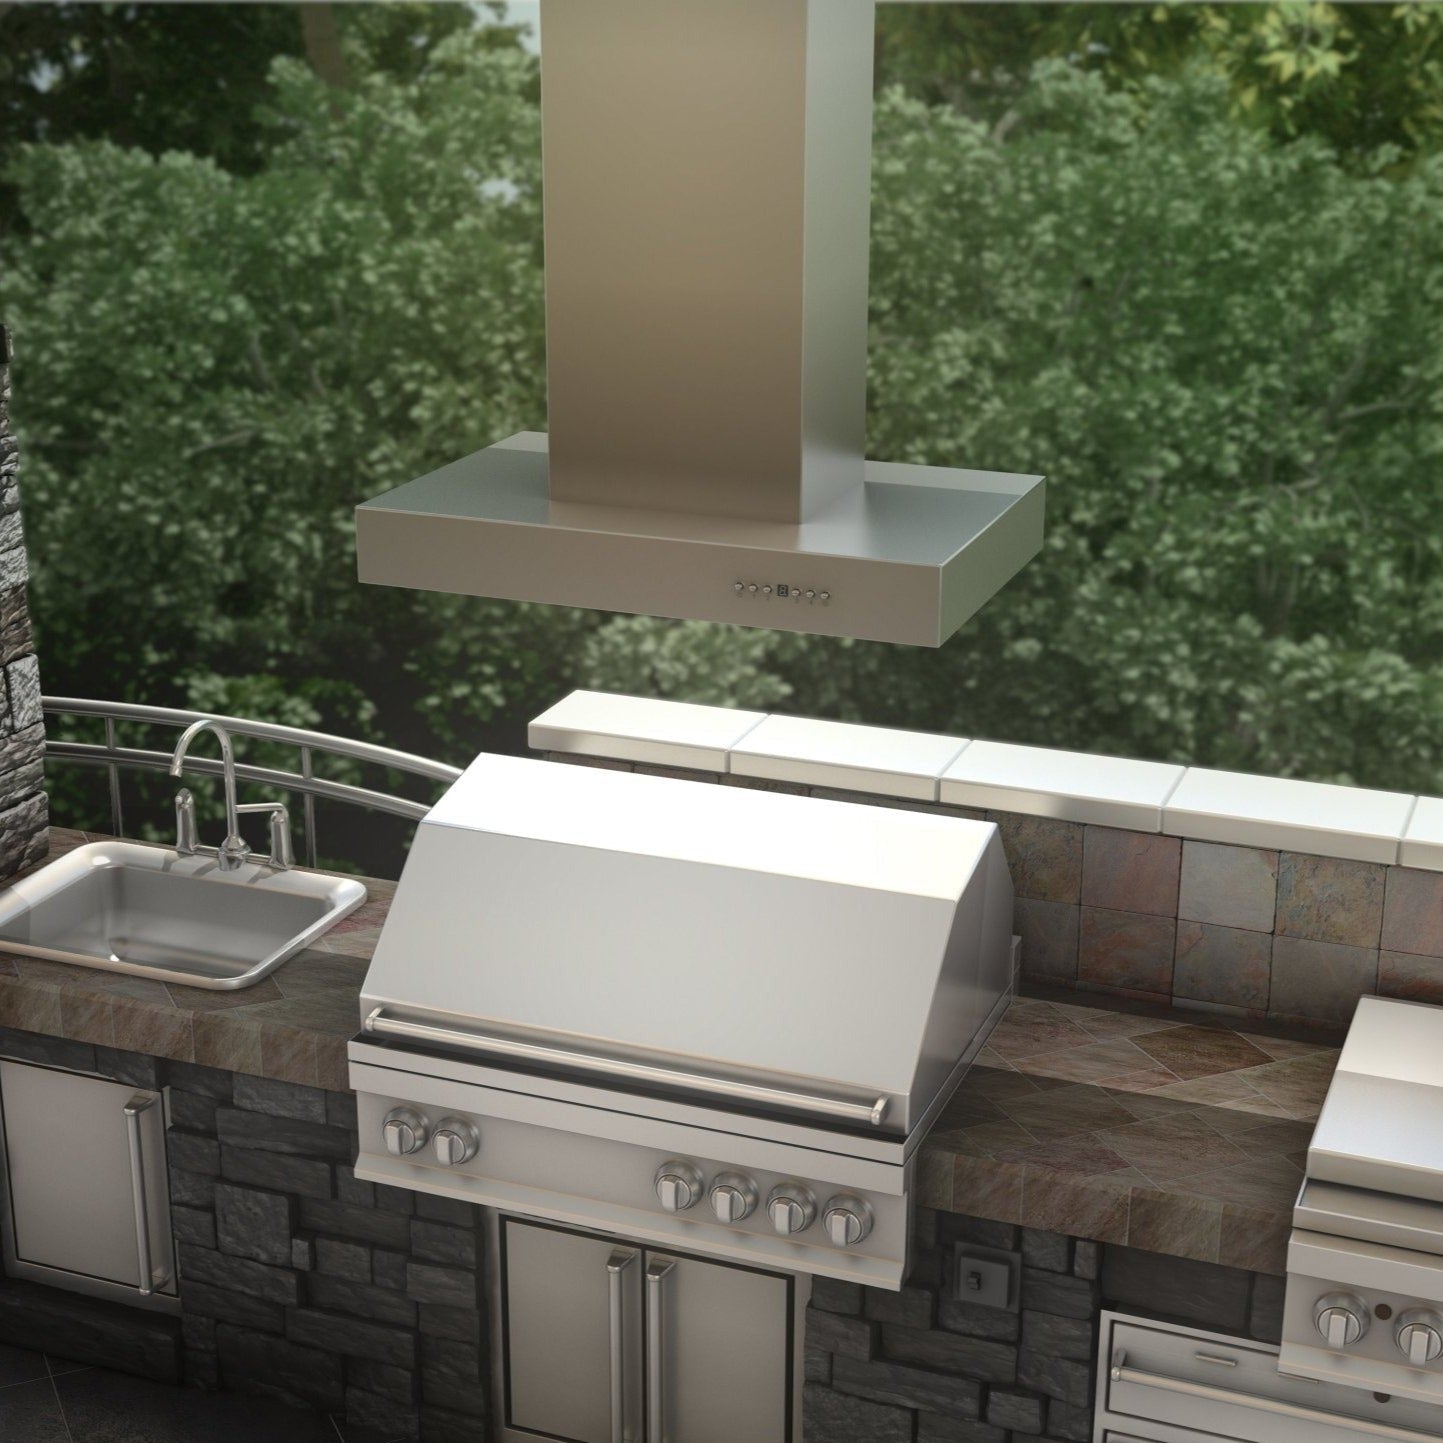 ZLINE Ducted Outdoor Island Mount Range Hood in Stainless Steel (KECOMi-304) rendering above an outdoor barbecue from above.